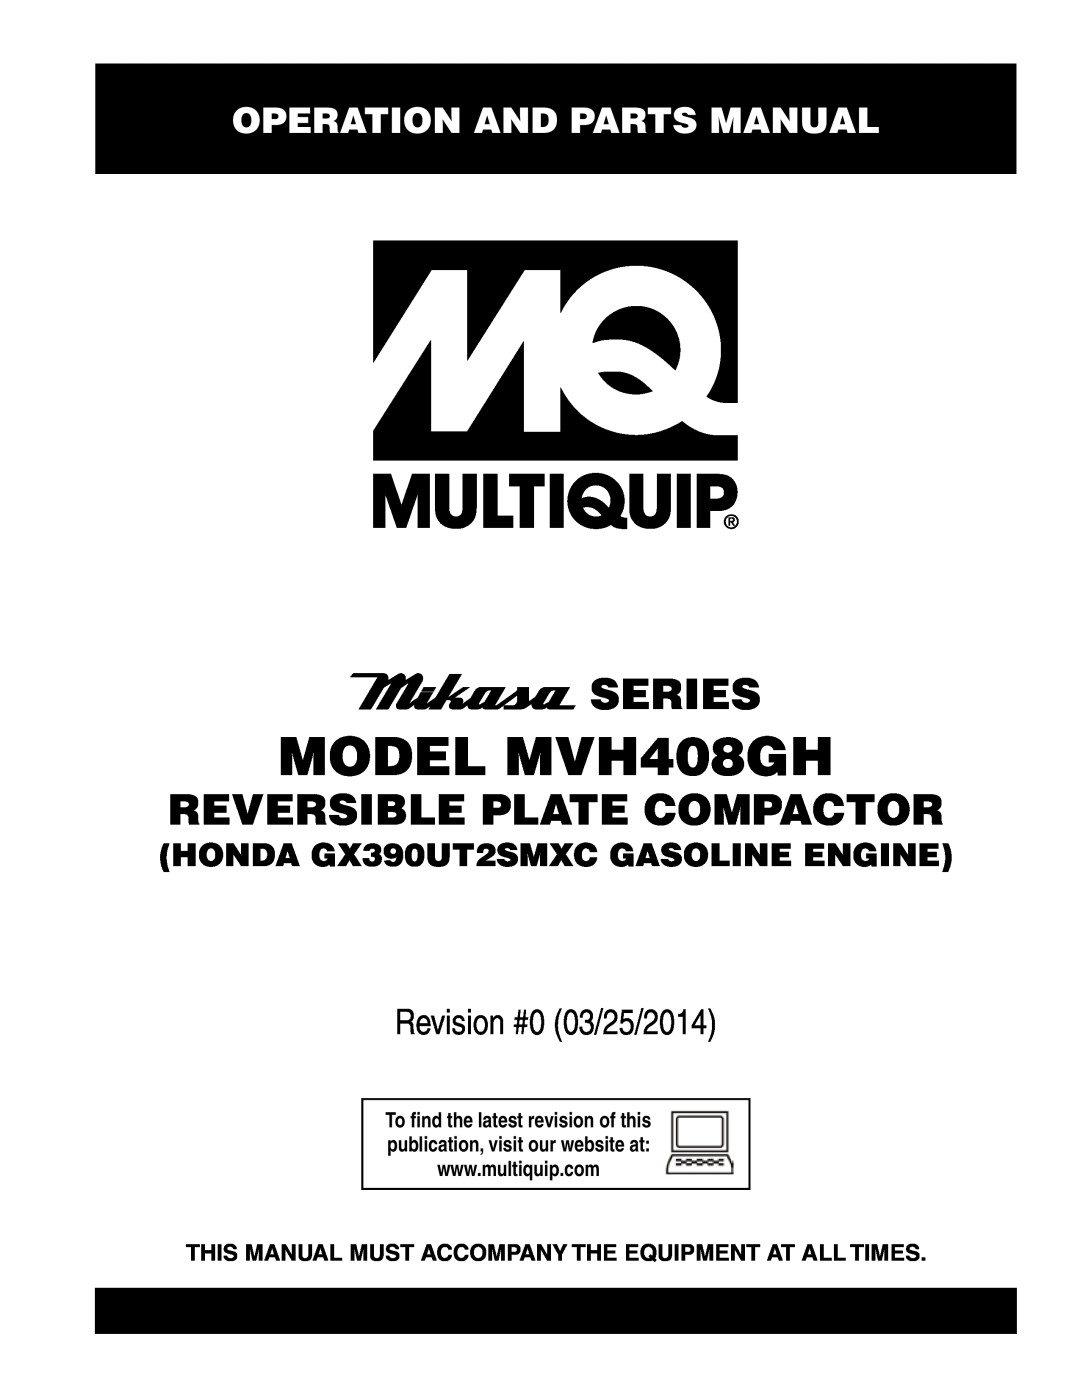 Multiquip MVH408GH manual Operation And Parts Manual, This Manual Must Accompany The Equipment At All Times, Series 